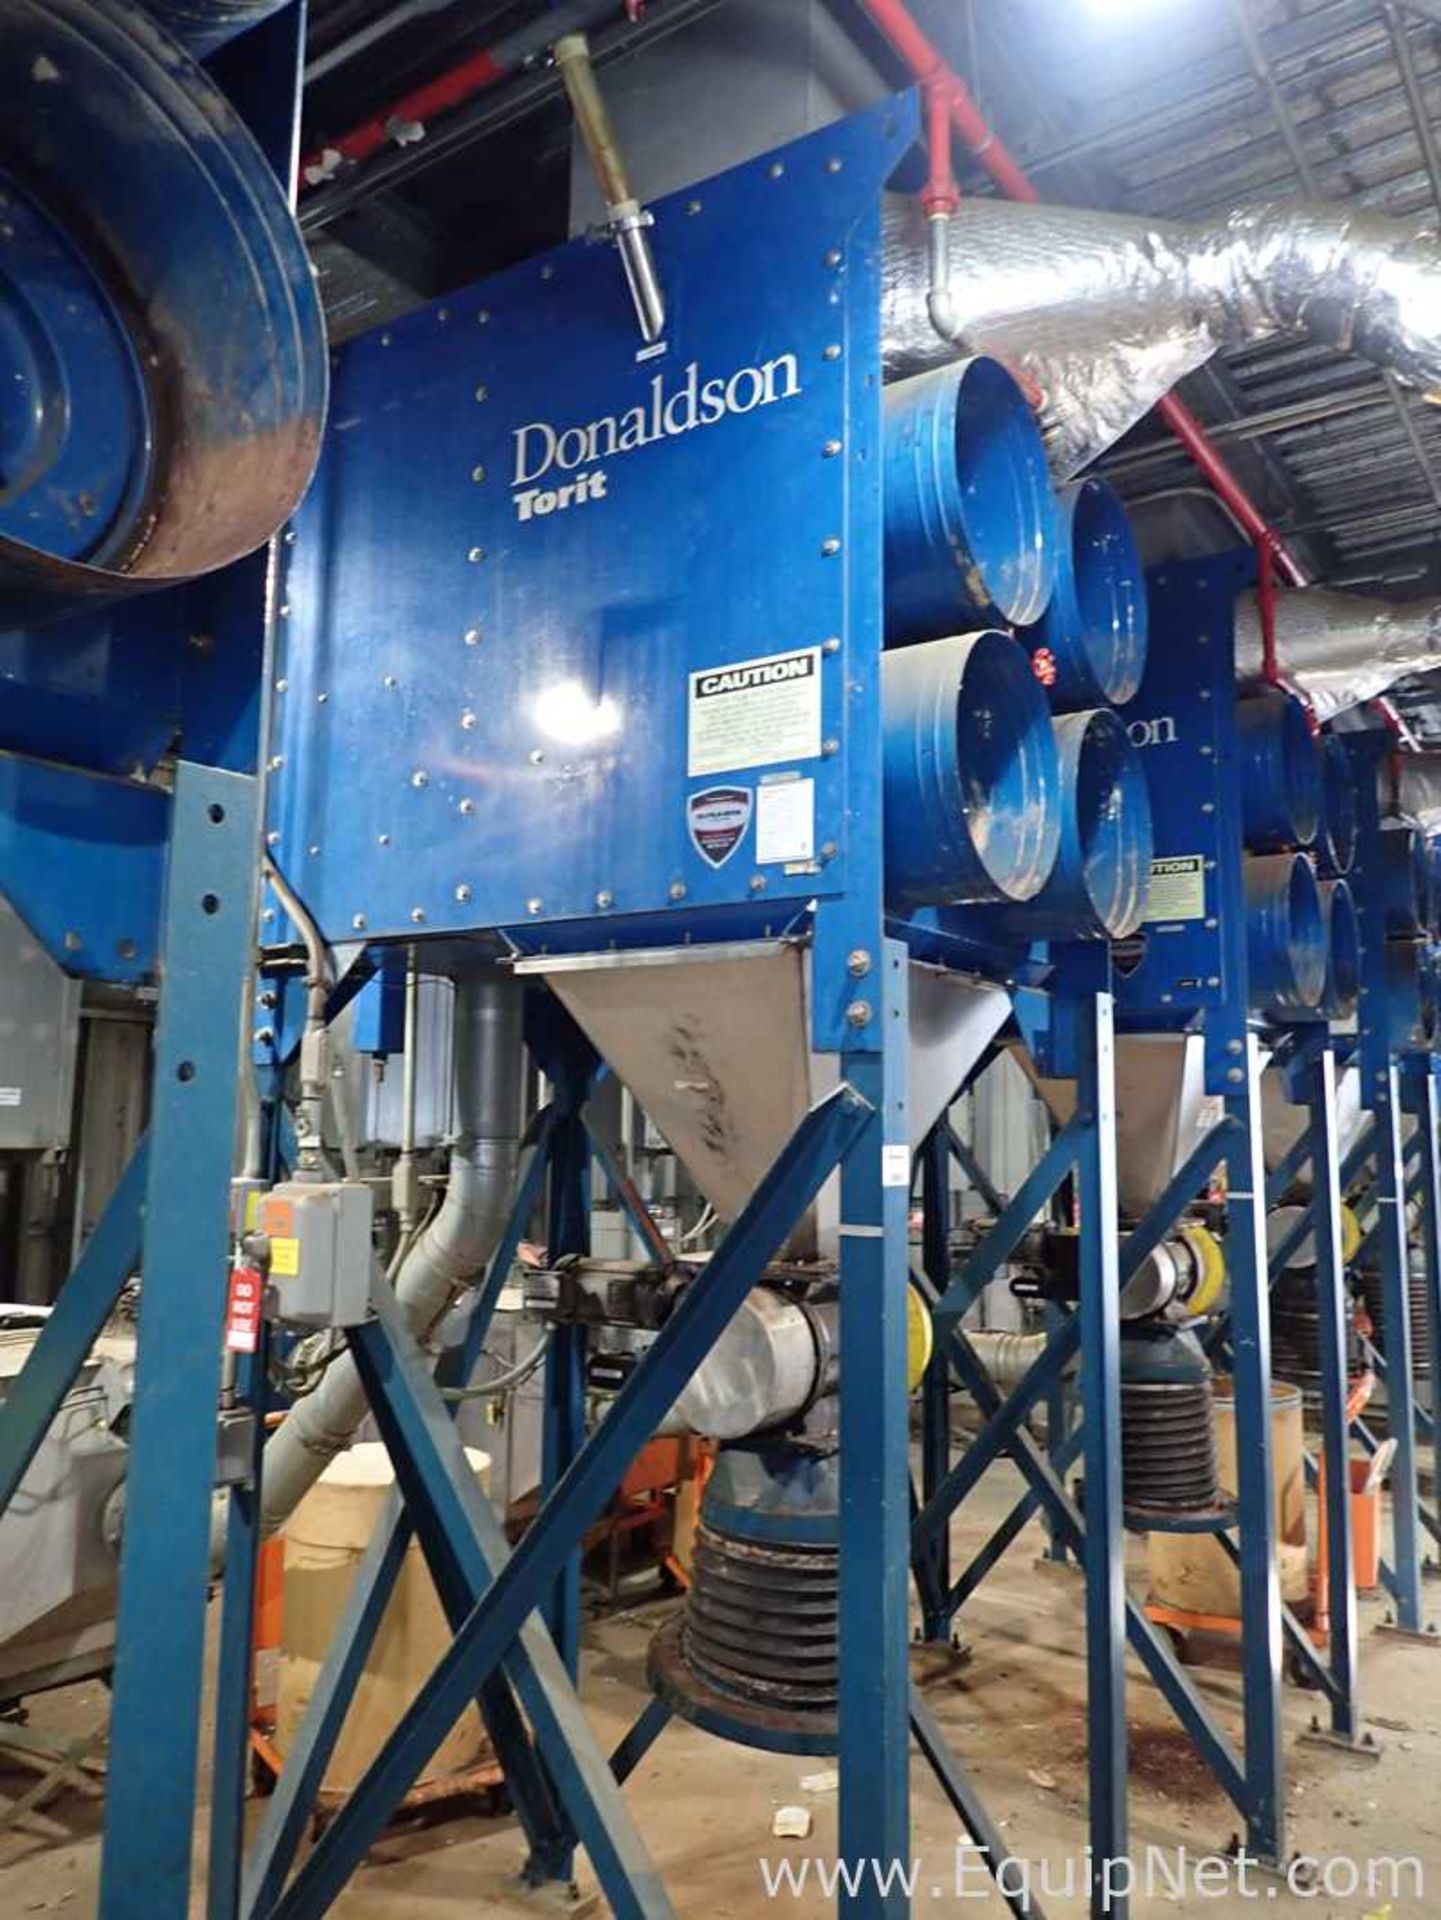 Donaldson Torit DFT 2-4 Dust Collector System - Image 2 of 10